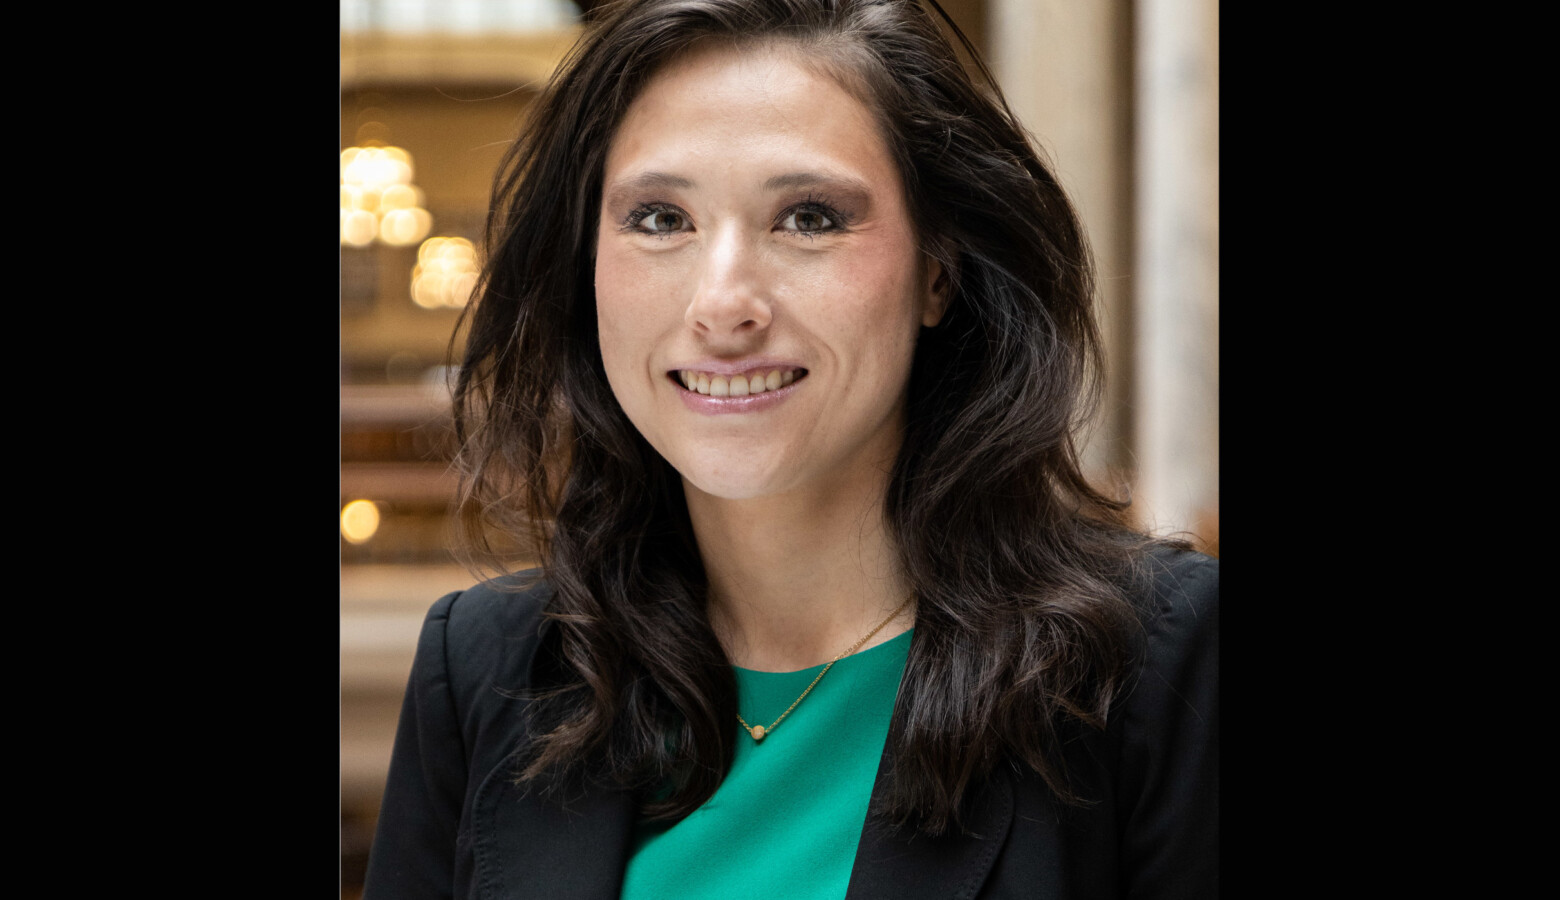 Amy Beard will be the Indiana Department of Insurance Commissioner, beginning June 2. (Courtesy of the governor's office)